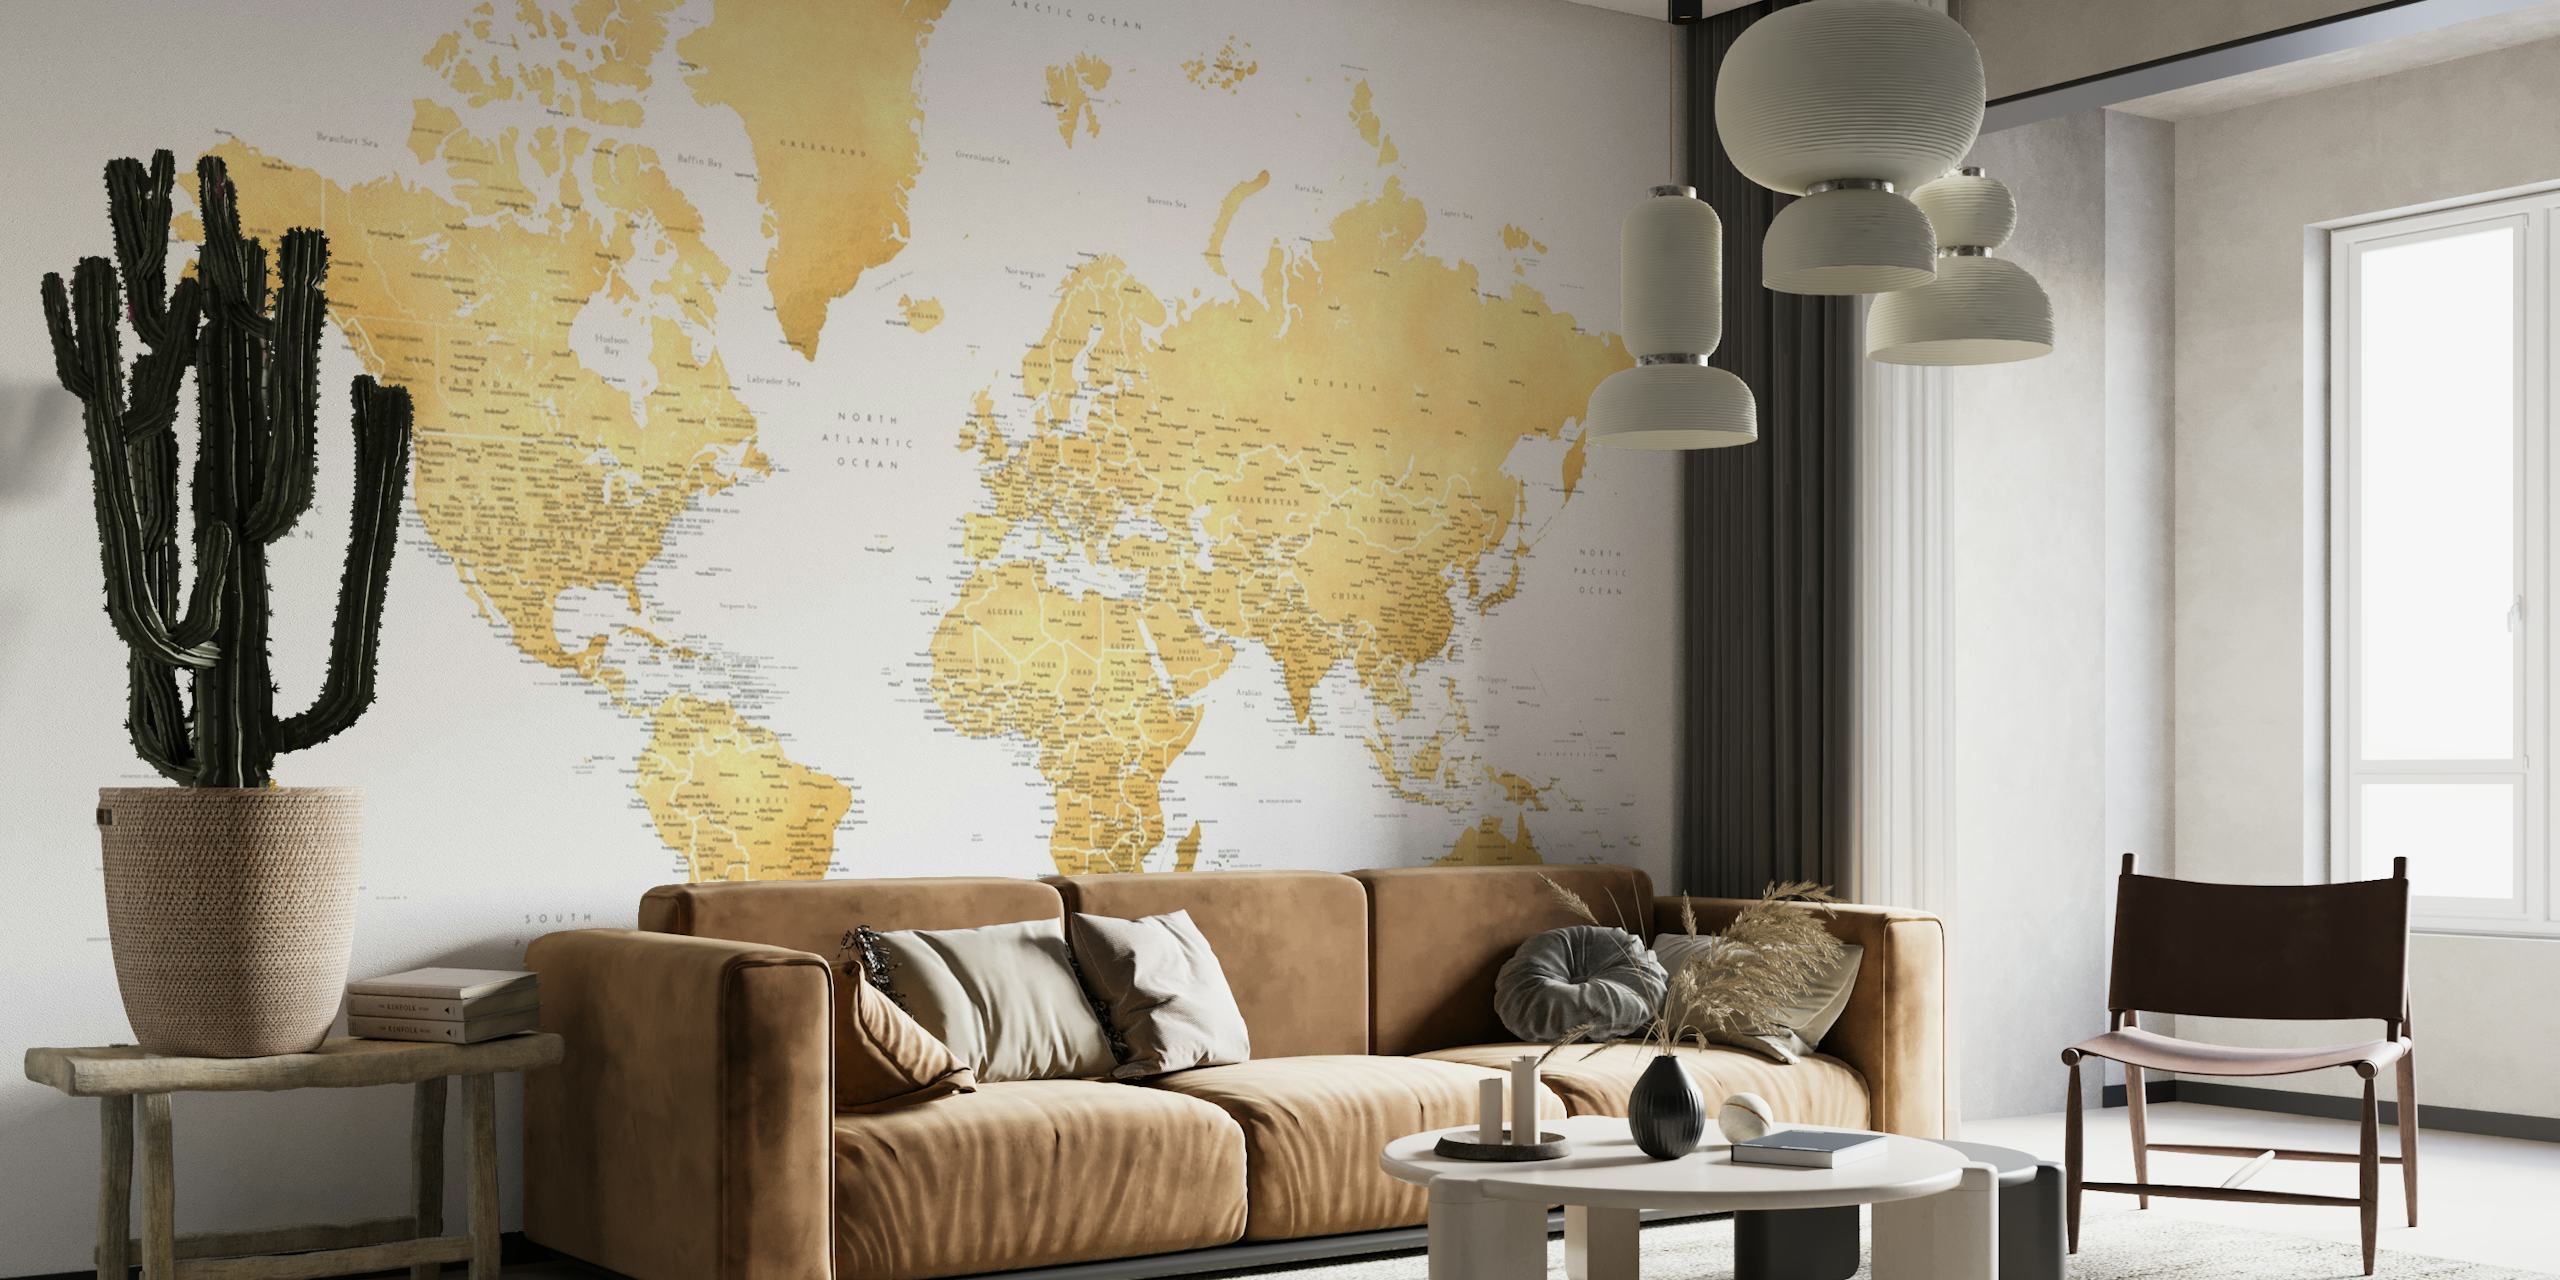 Detailed world map Rossie papel pintado